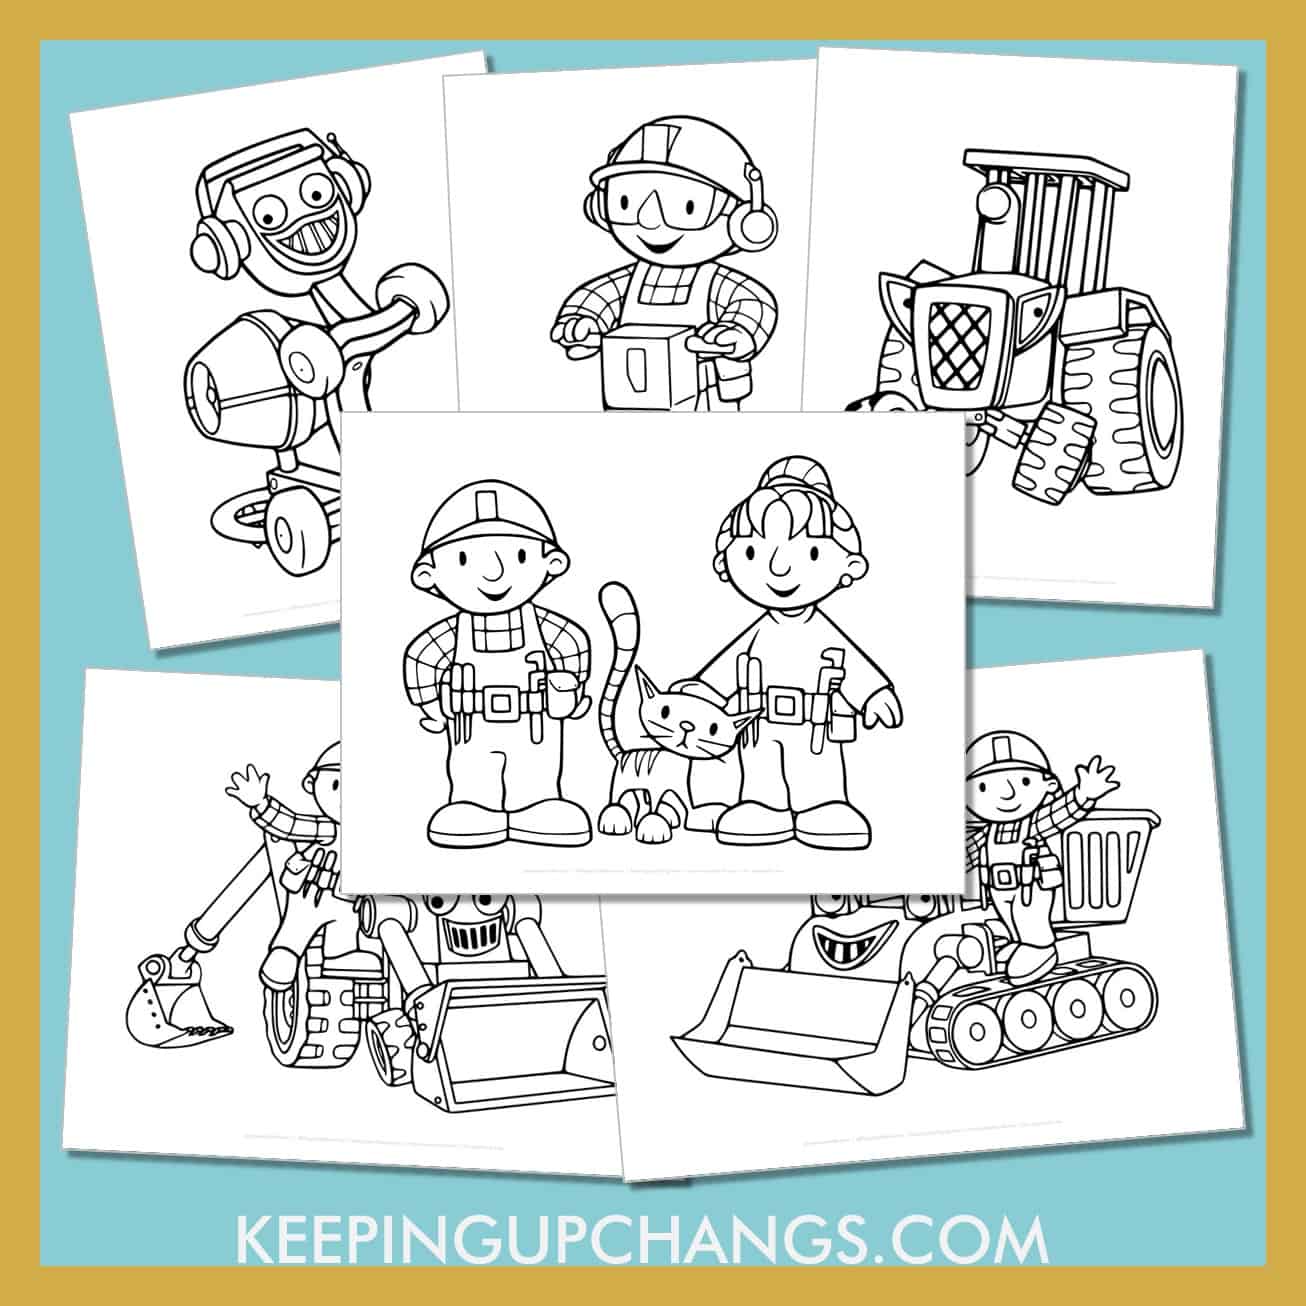 free bob the builder pictures to color for toddlers, kids, adults.